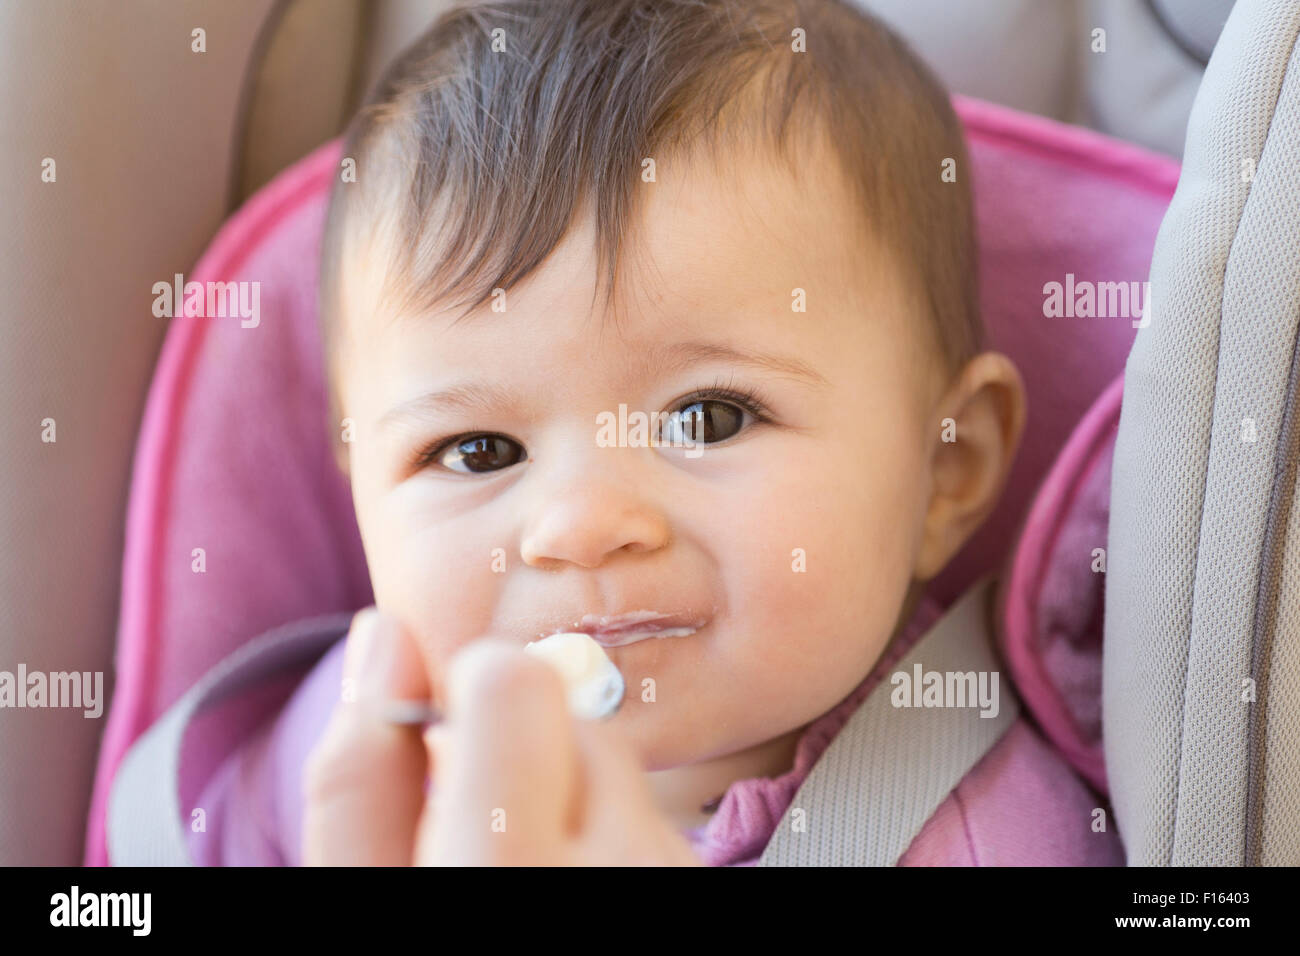 A six months old baby girl eating white yogurt from a spoon and looking at camera Stock Photo